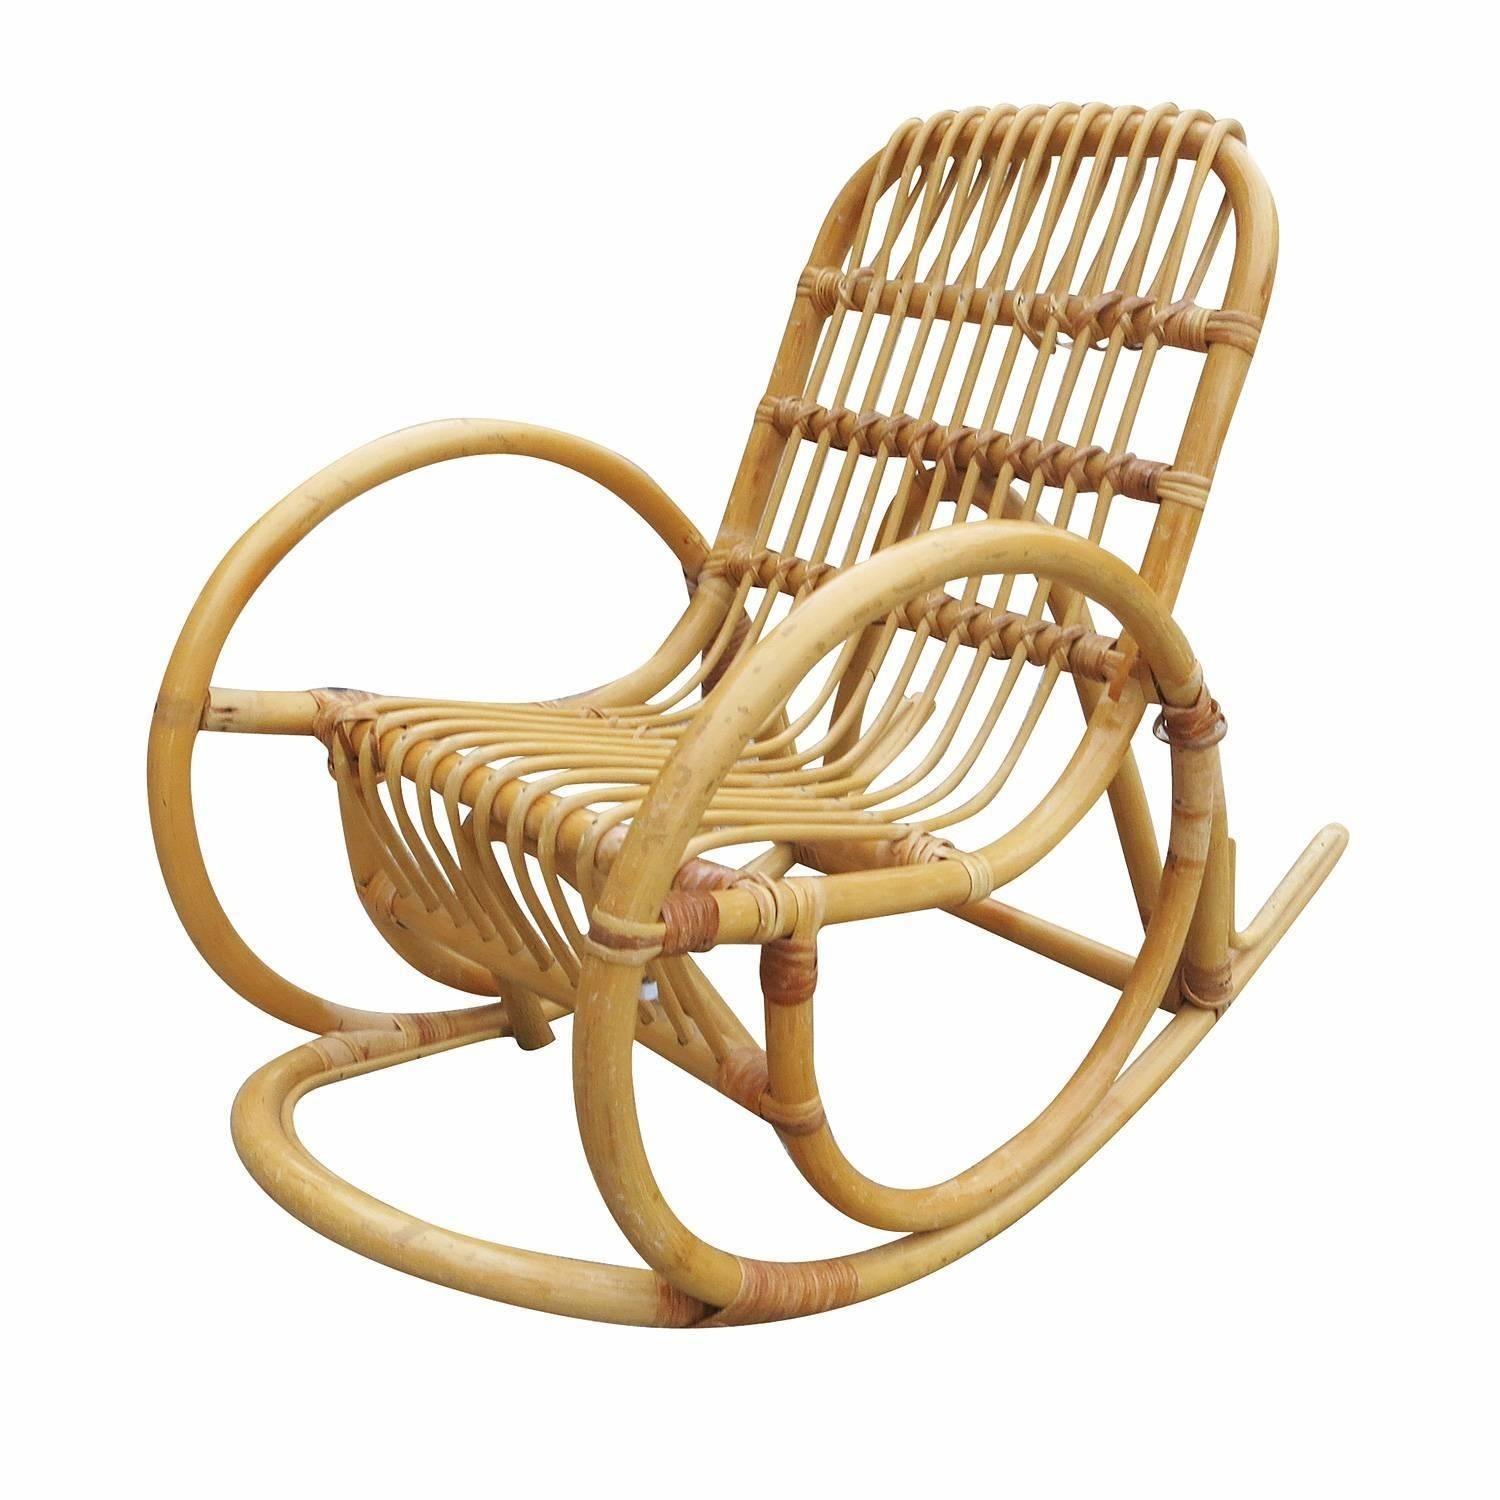 A rare Paul Frankl inspired one-strand snake arm child's size rattan rocking chair with stick rattan seat.


Restored to new for you.

All rattan, bamboo and wicker furniture has been painstakingly refurbished to the highest standards with the